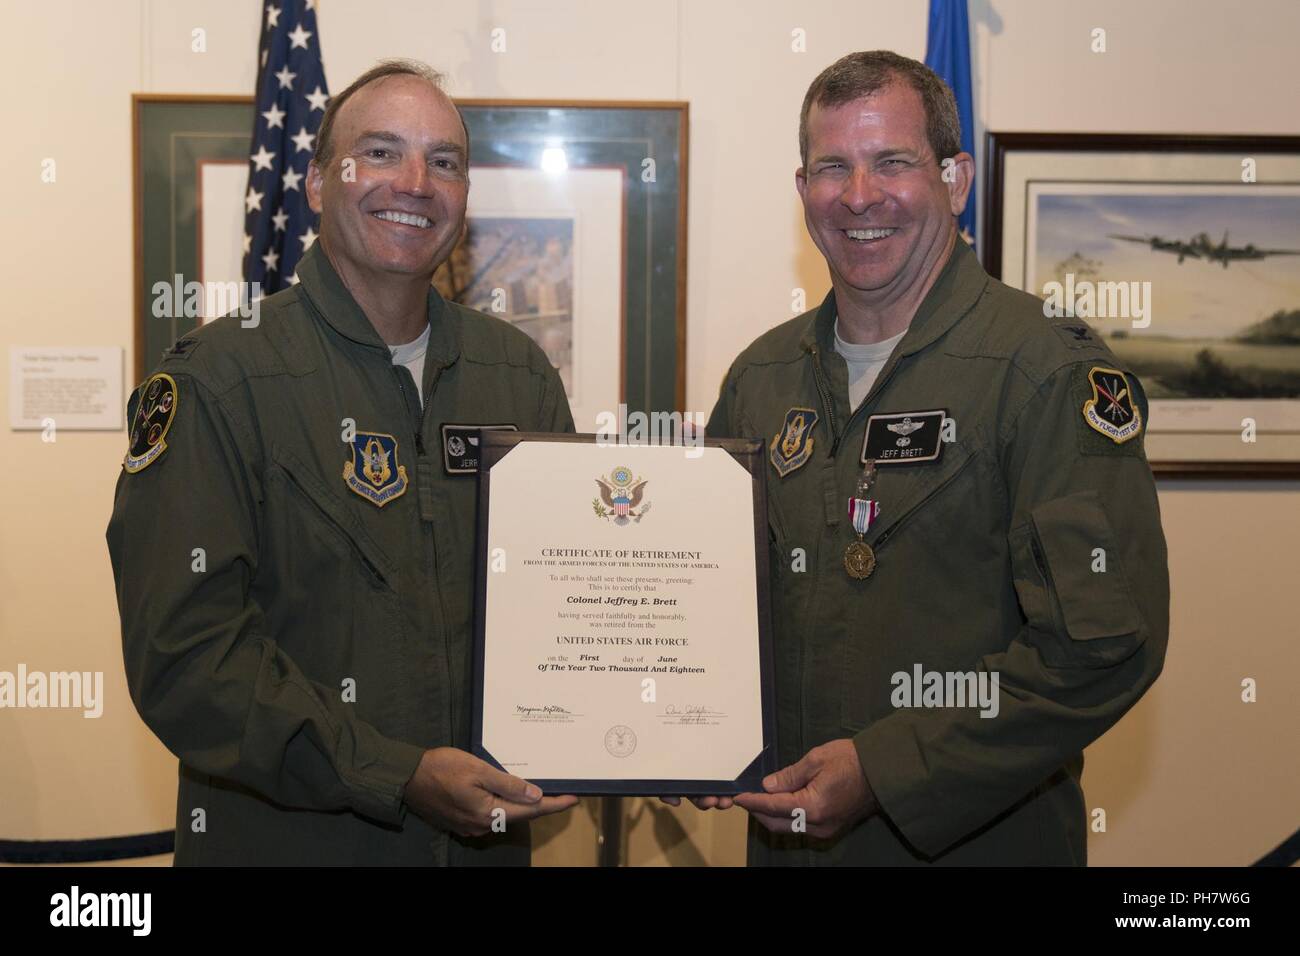 Col. Jeffrey Brett, right, receives a certificate of retirement from retired Col. Jerry Byars during a retirement ceremony at the Museum of Aviation, Robins Air Force Base, Ga., June 22, 2018. Brett is a former commander of the 413th Flight Test Group who served in the position from March 2015 to June 2016. His most recent assignment was at Stuttgart, Germany, as a battle watch captain for the U.S. European Command. Stock Photo